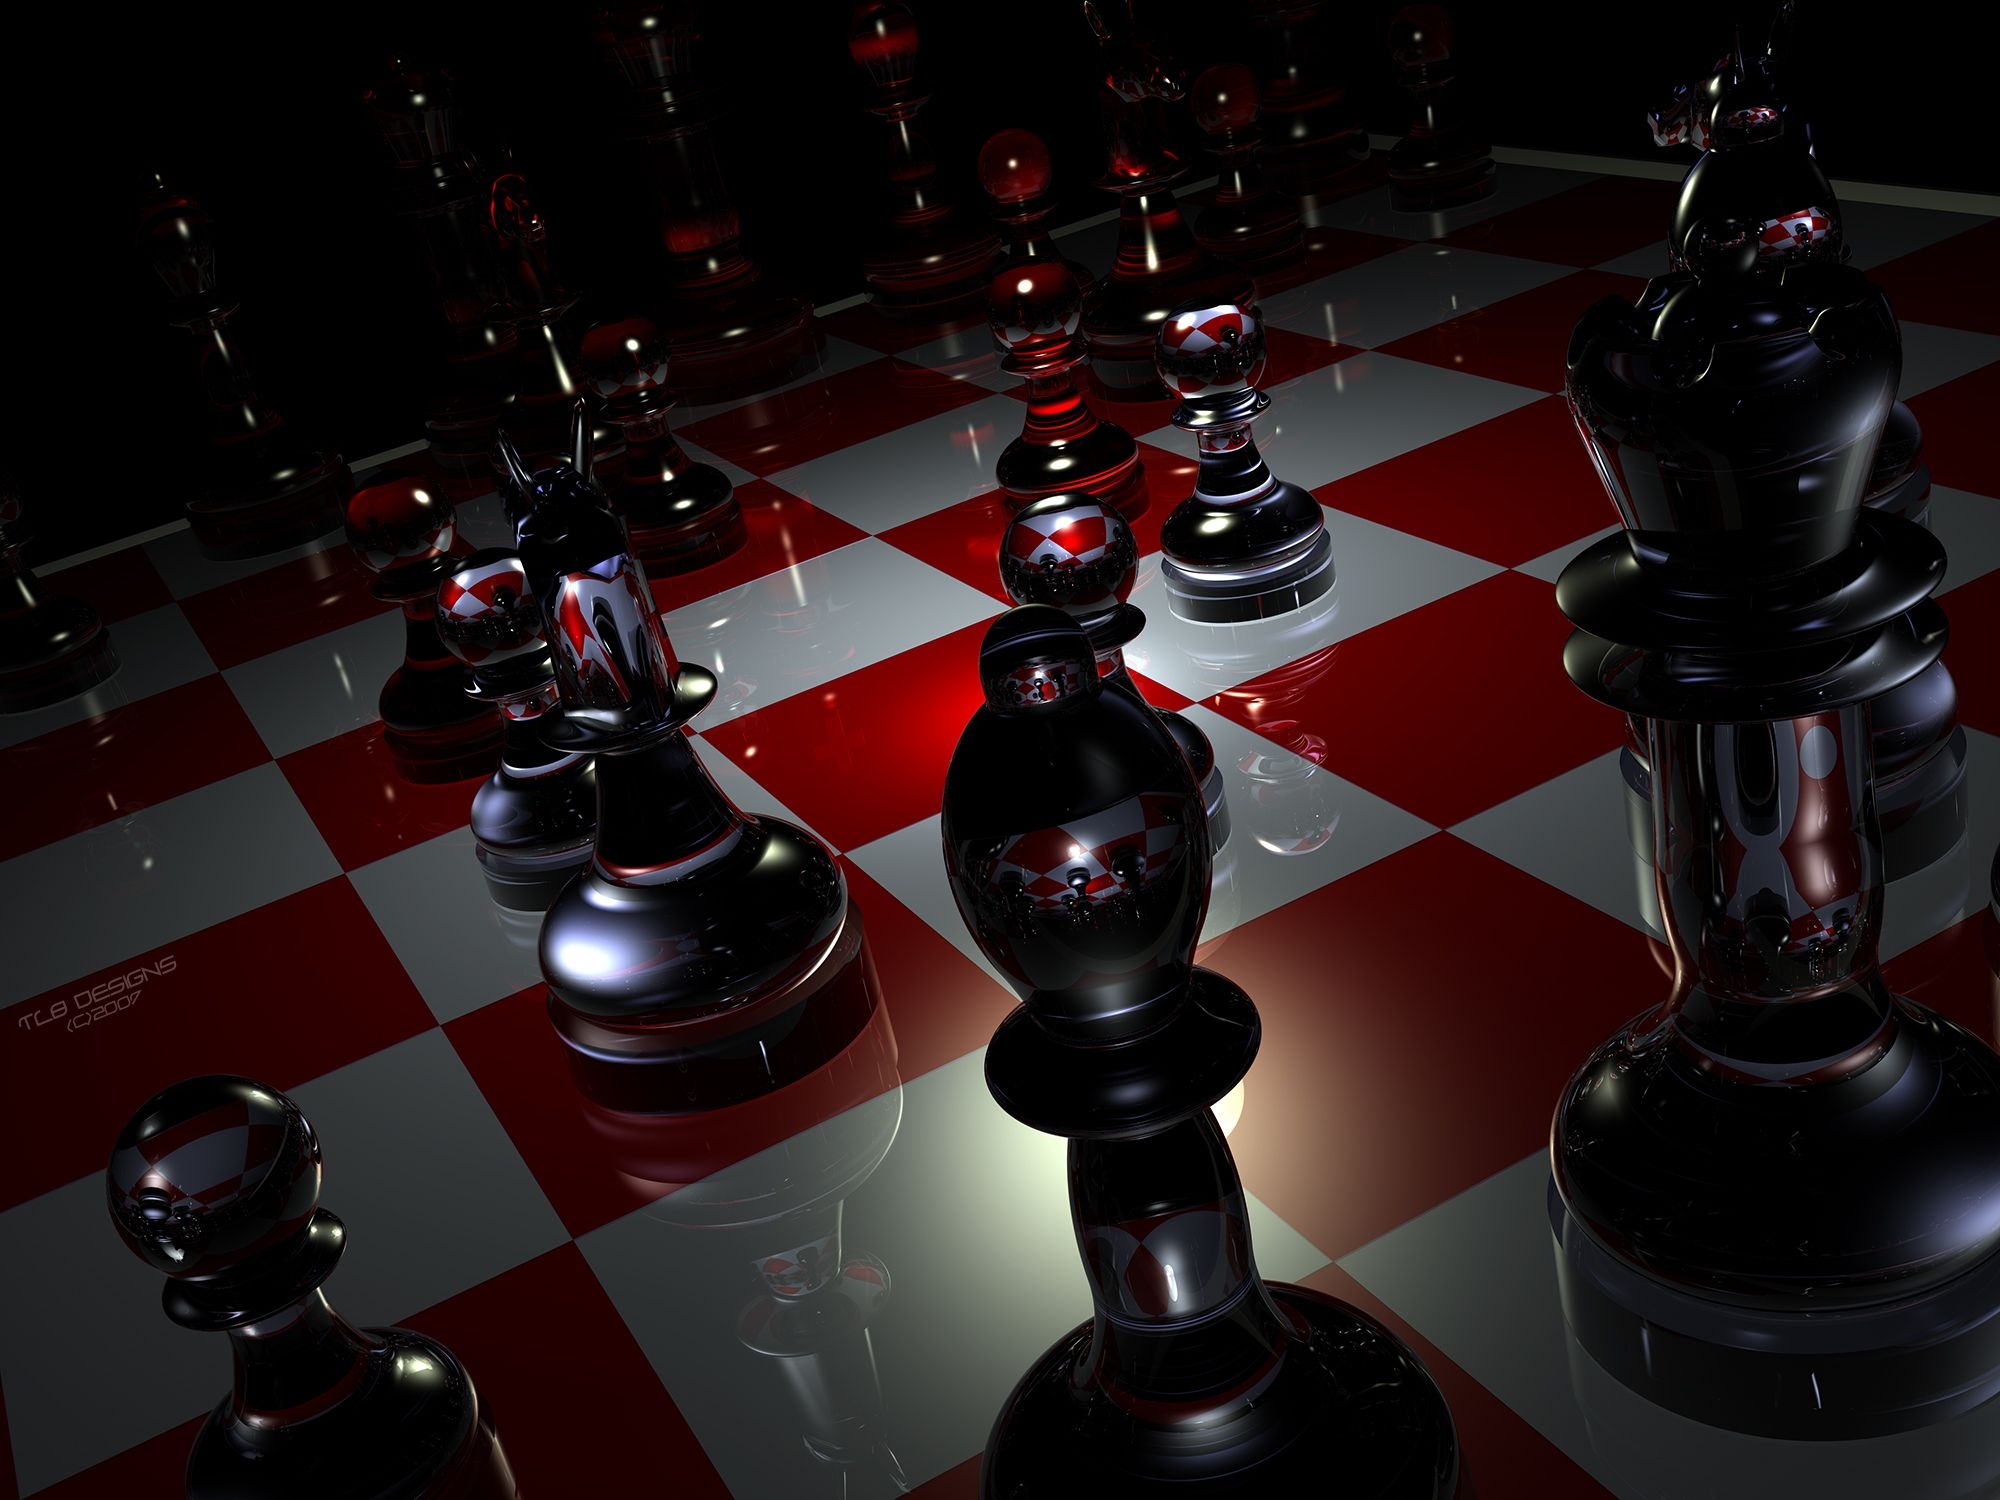 123301 download wallpaper 3d, glass, chess, shapes, shape, board screensavers and pictures for free